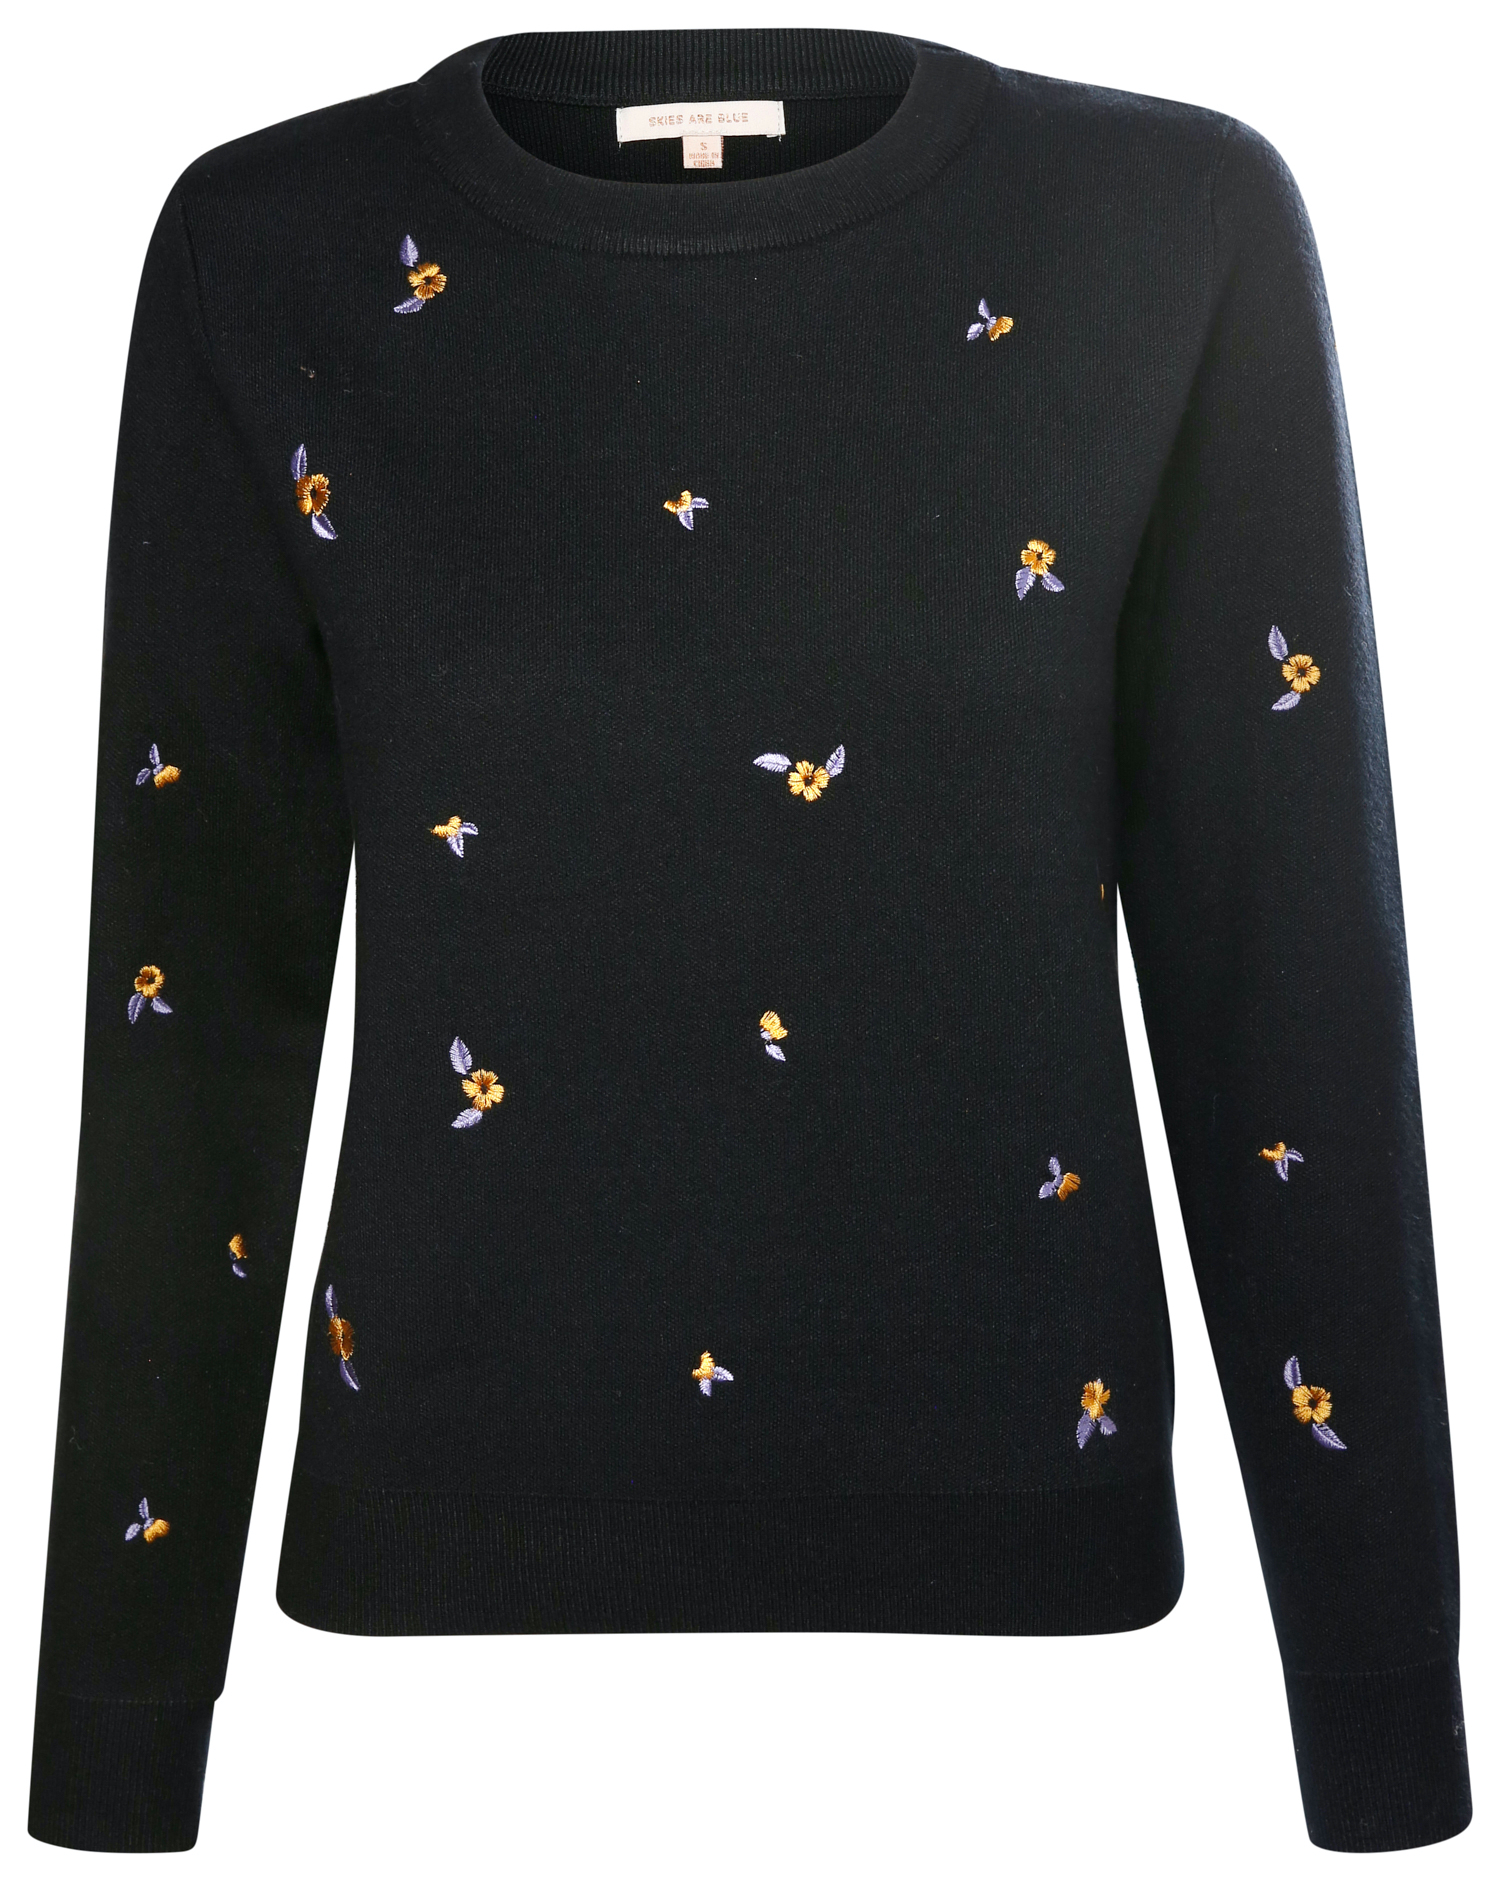 Skies are Blue Floral Embroidered Sweater